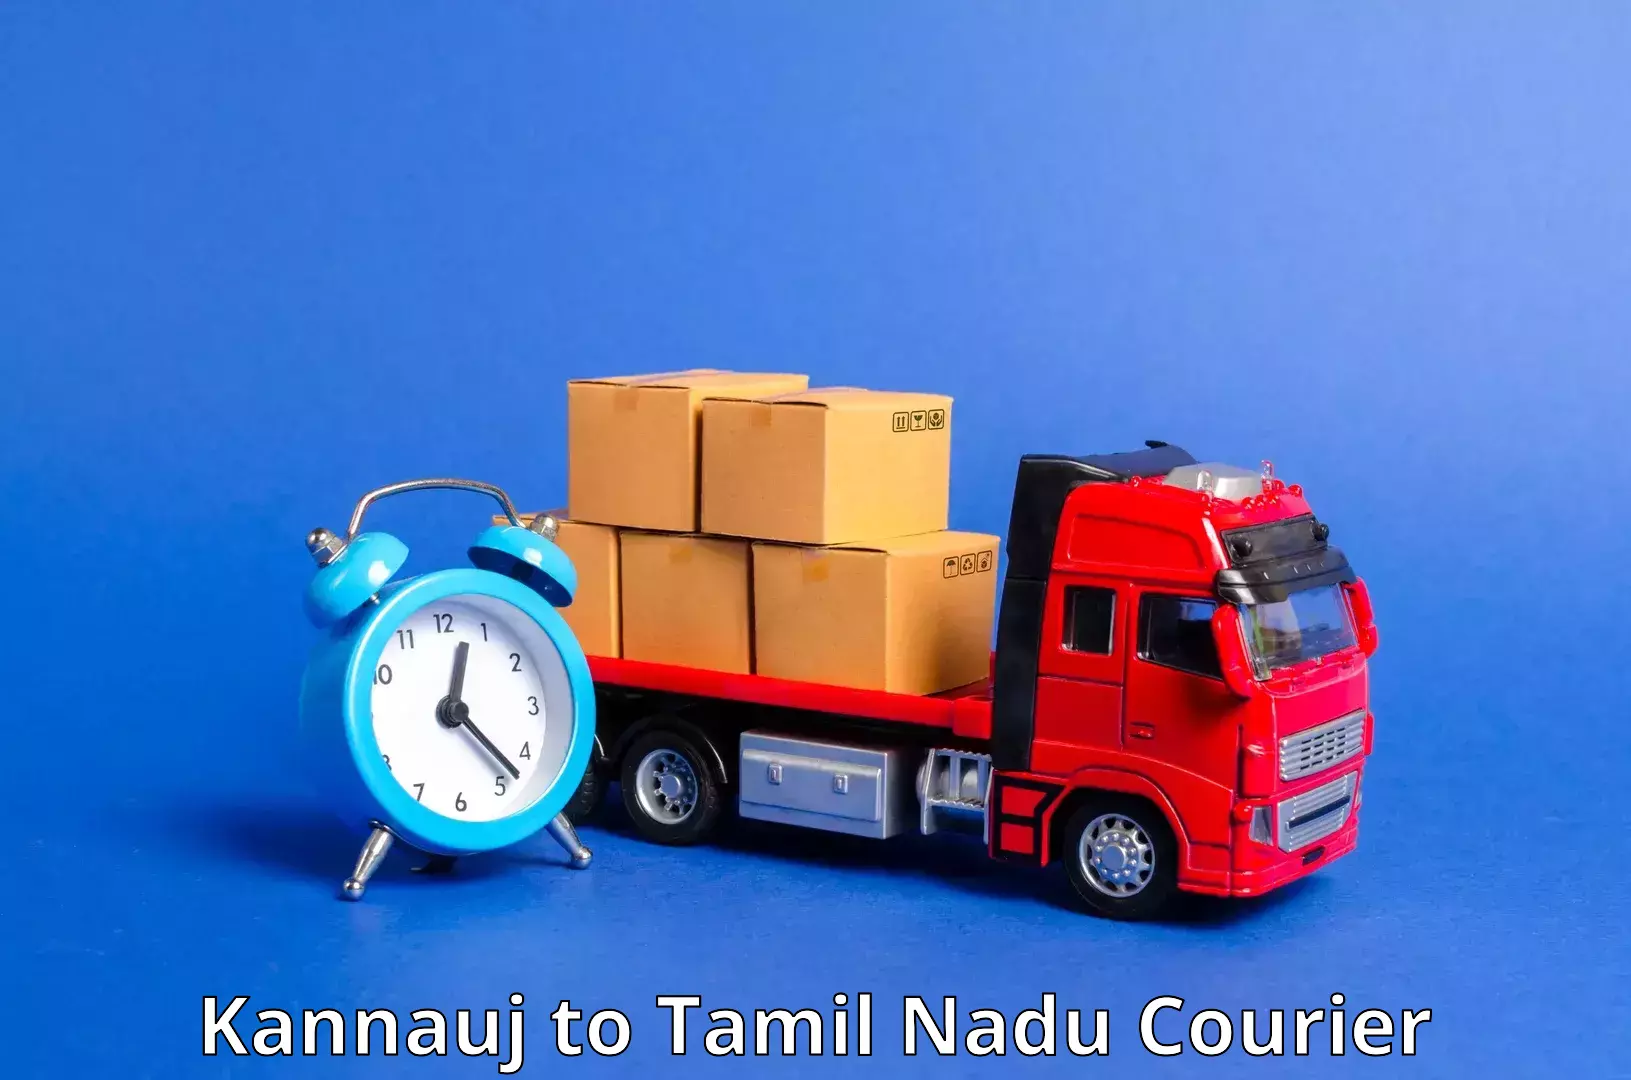 Flexible delivery schedules Kannauj to Oddanchatram